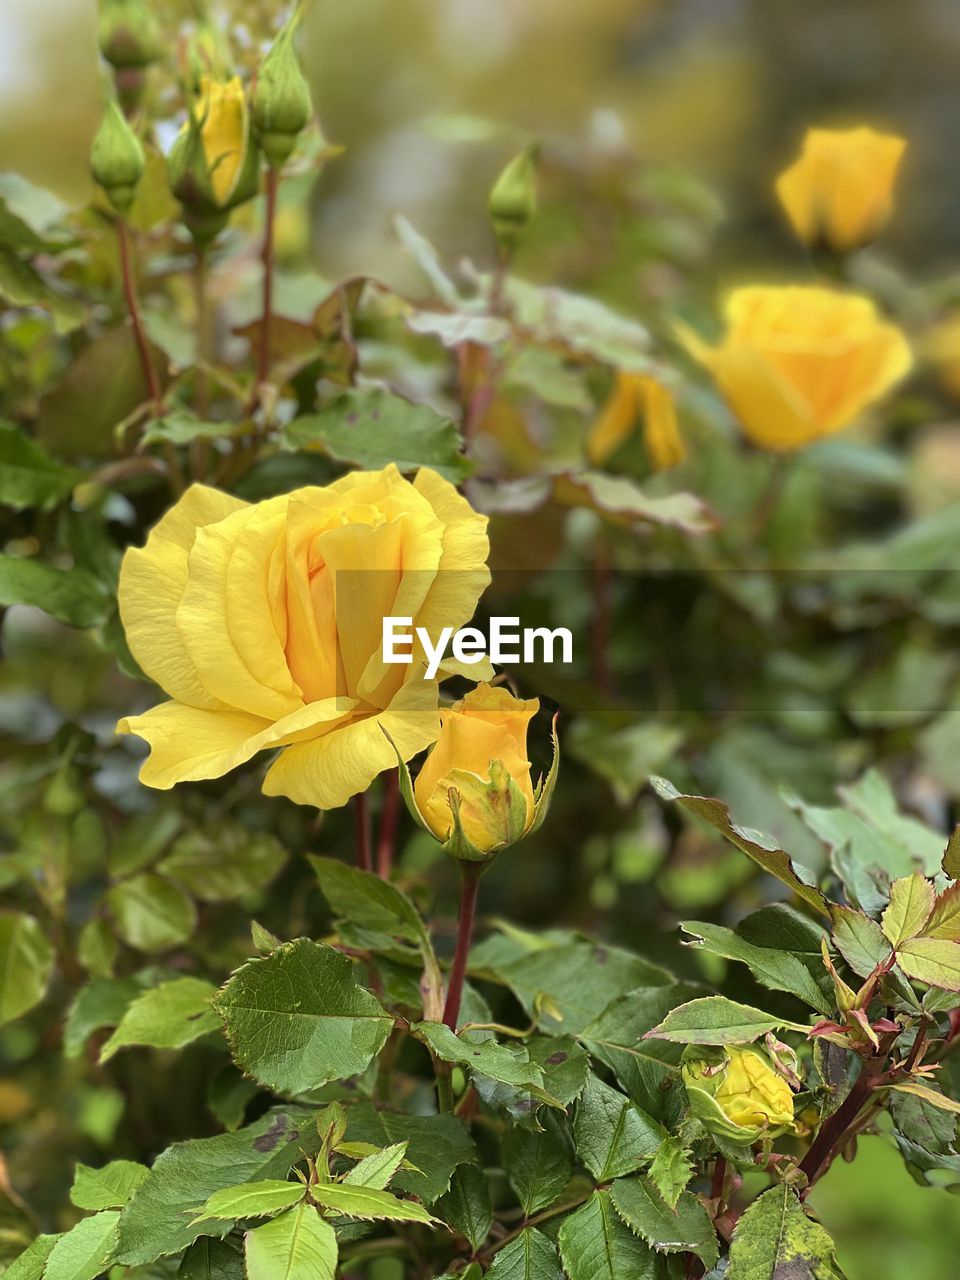 plant, flower, flowering plant, yellow, beauty in nature, freshness, nature, plant part, leaf, growth, flower head, petal, close-up, inflorescence, fragility, no people, focus on foreground, wildflower, outdoors, springtime, green, day, blossom, animal wildlife, botany, rose, sunlight